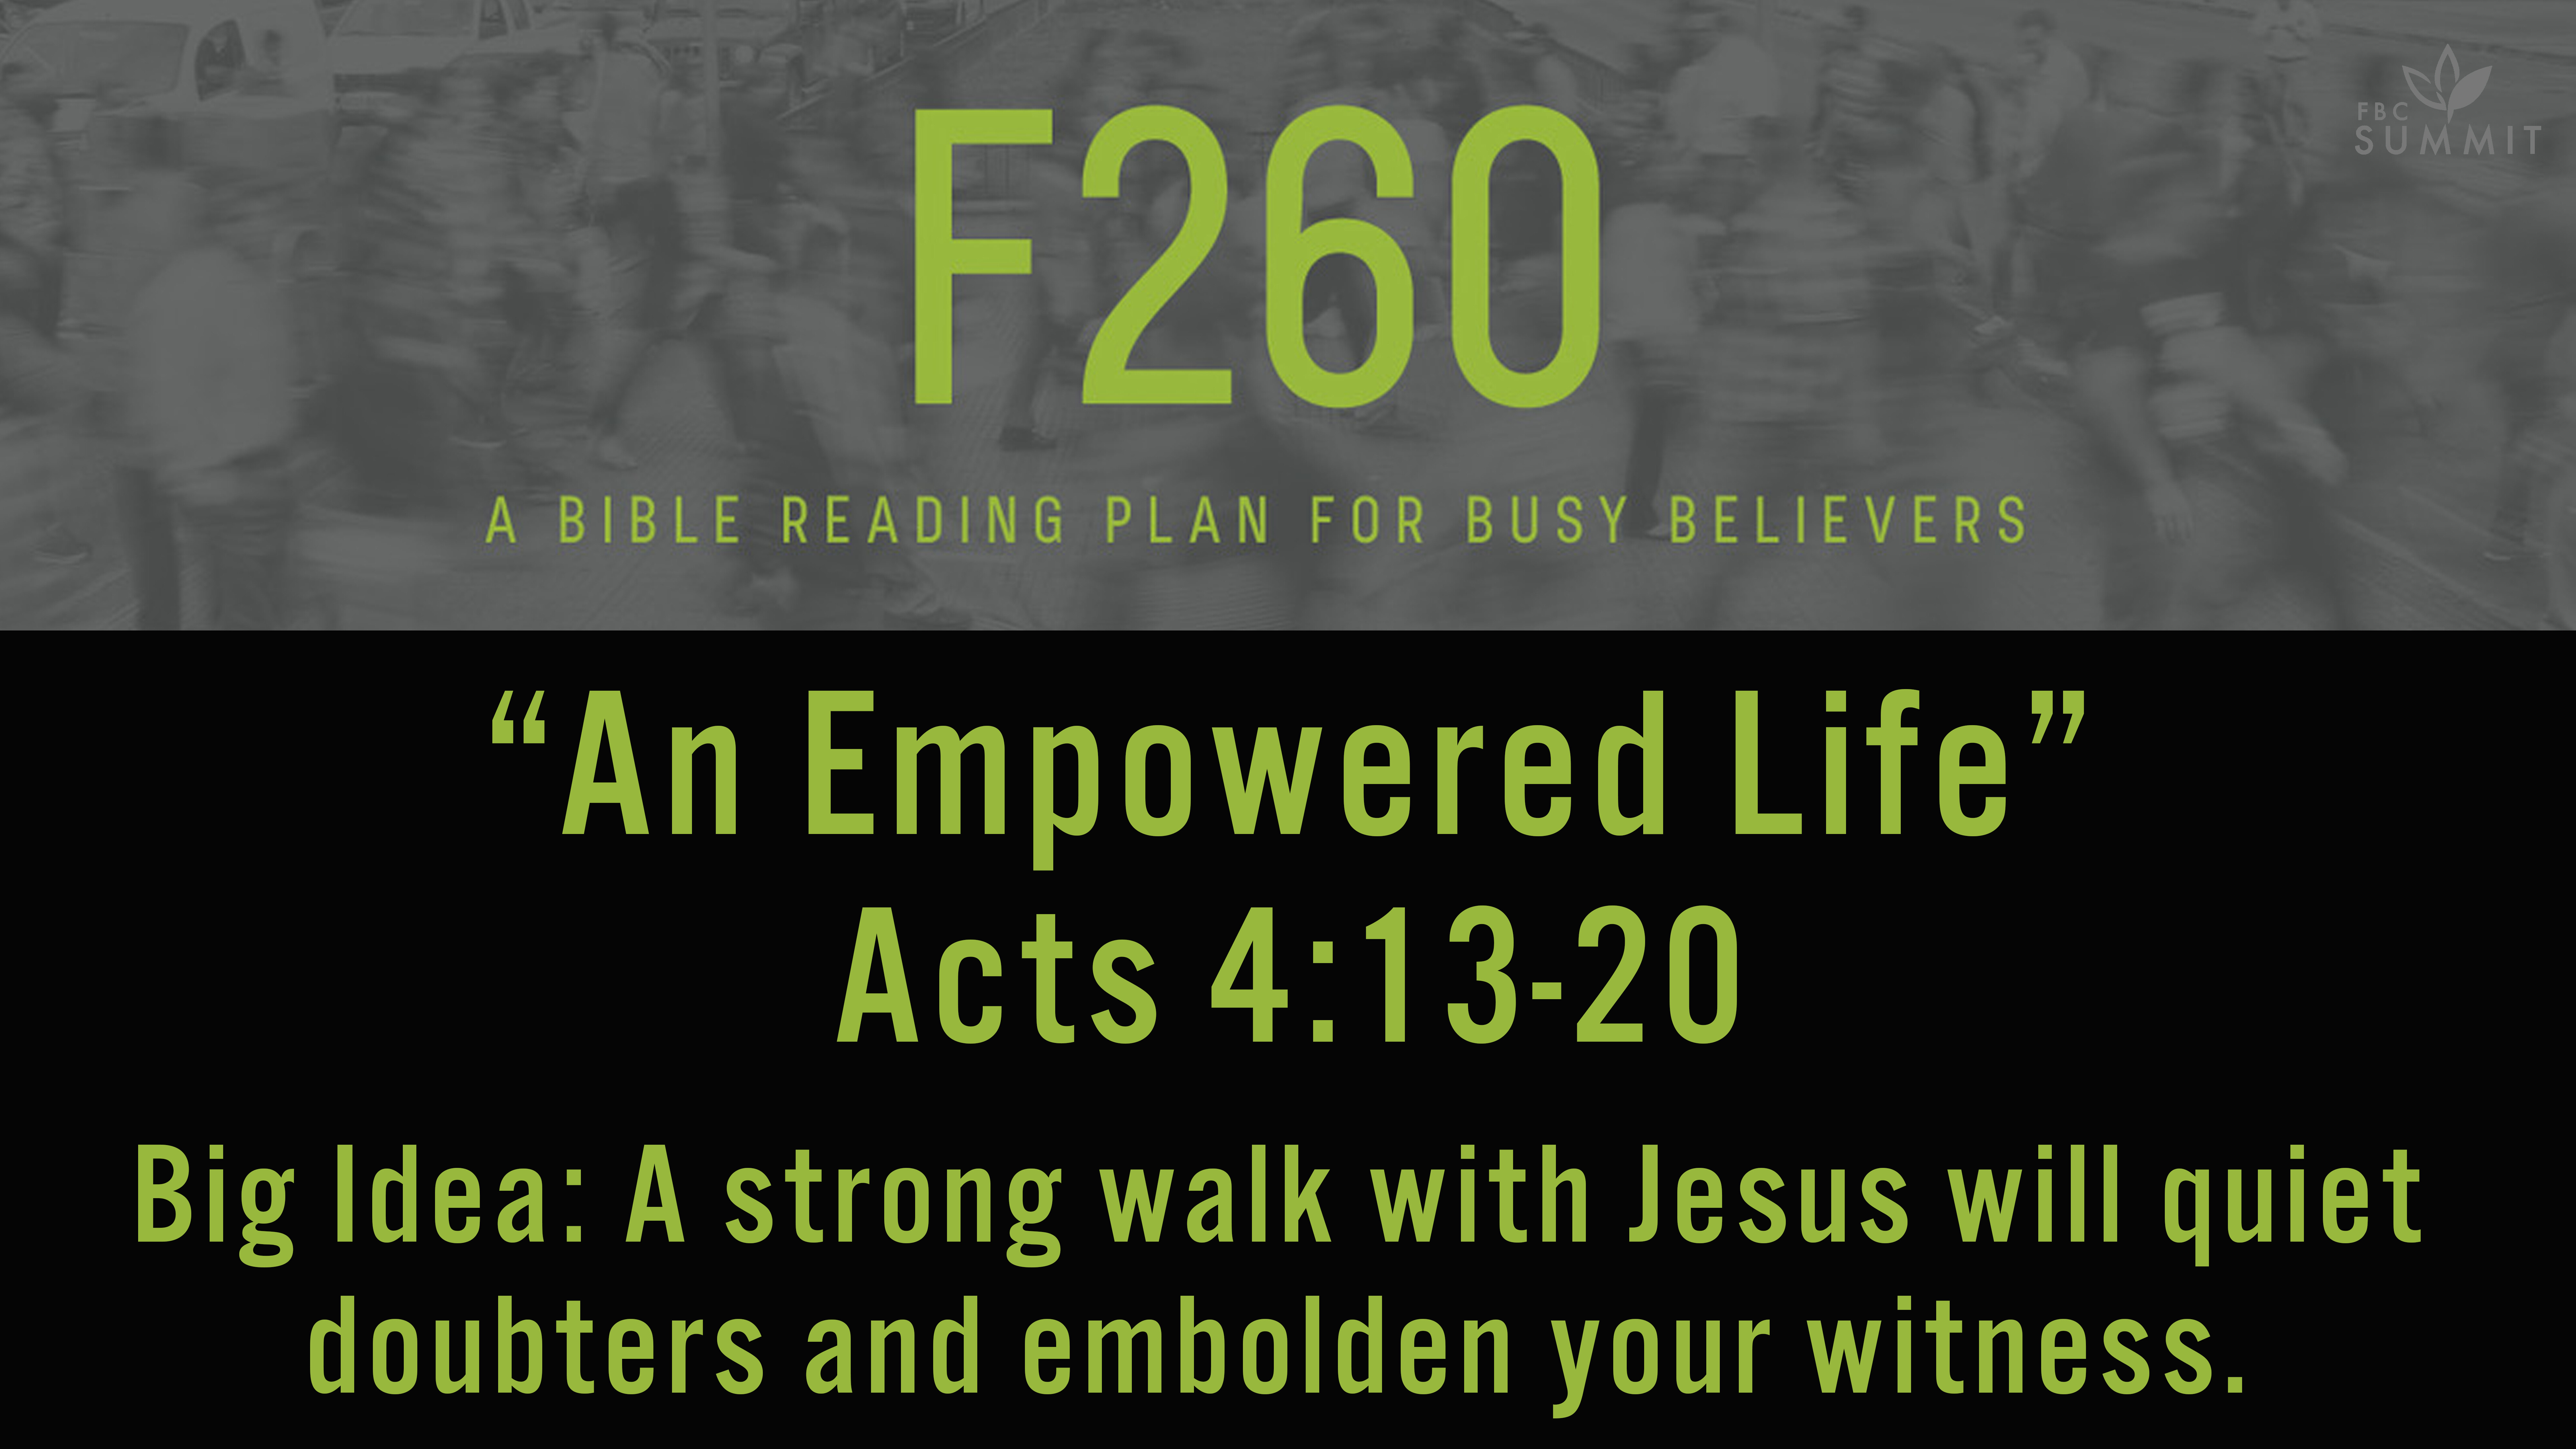 F260: "An Empowered Life" Acts 4:13-20